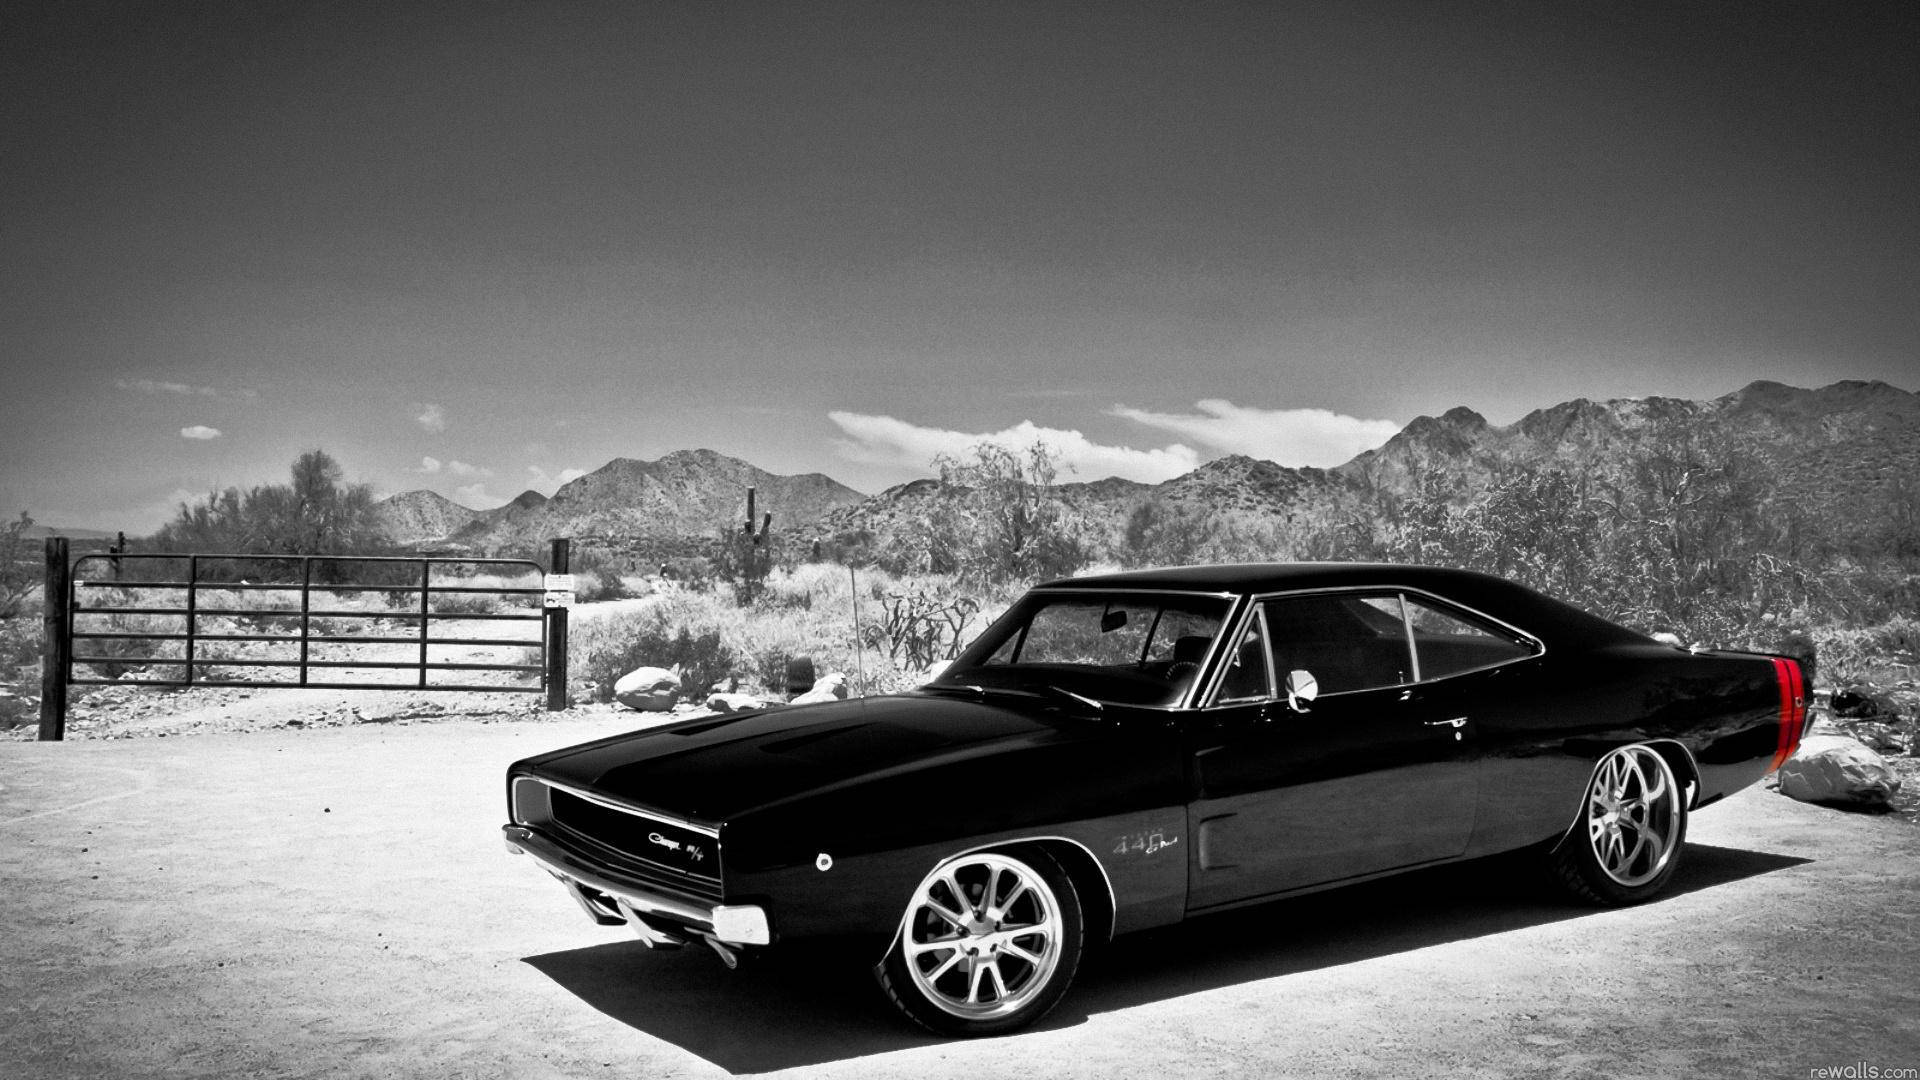 Full Hd Car Dodge Charger R/t Background